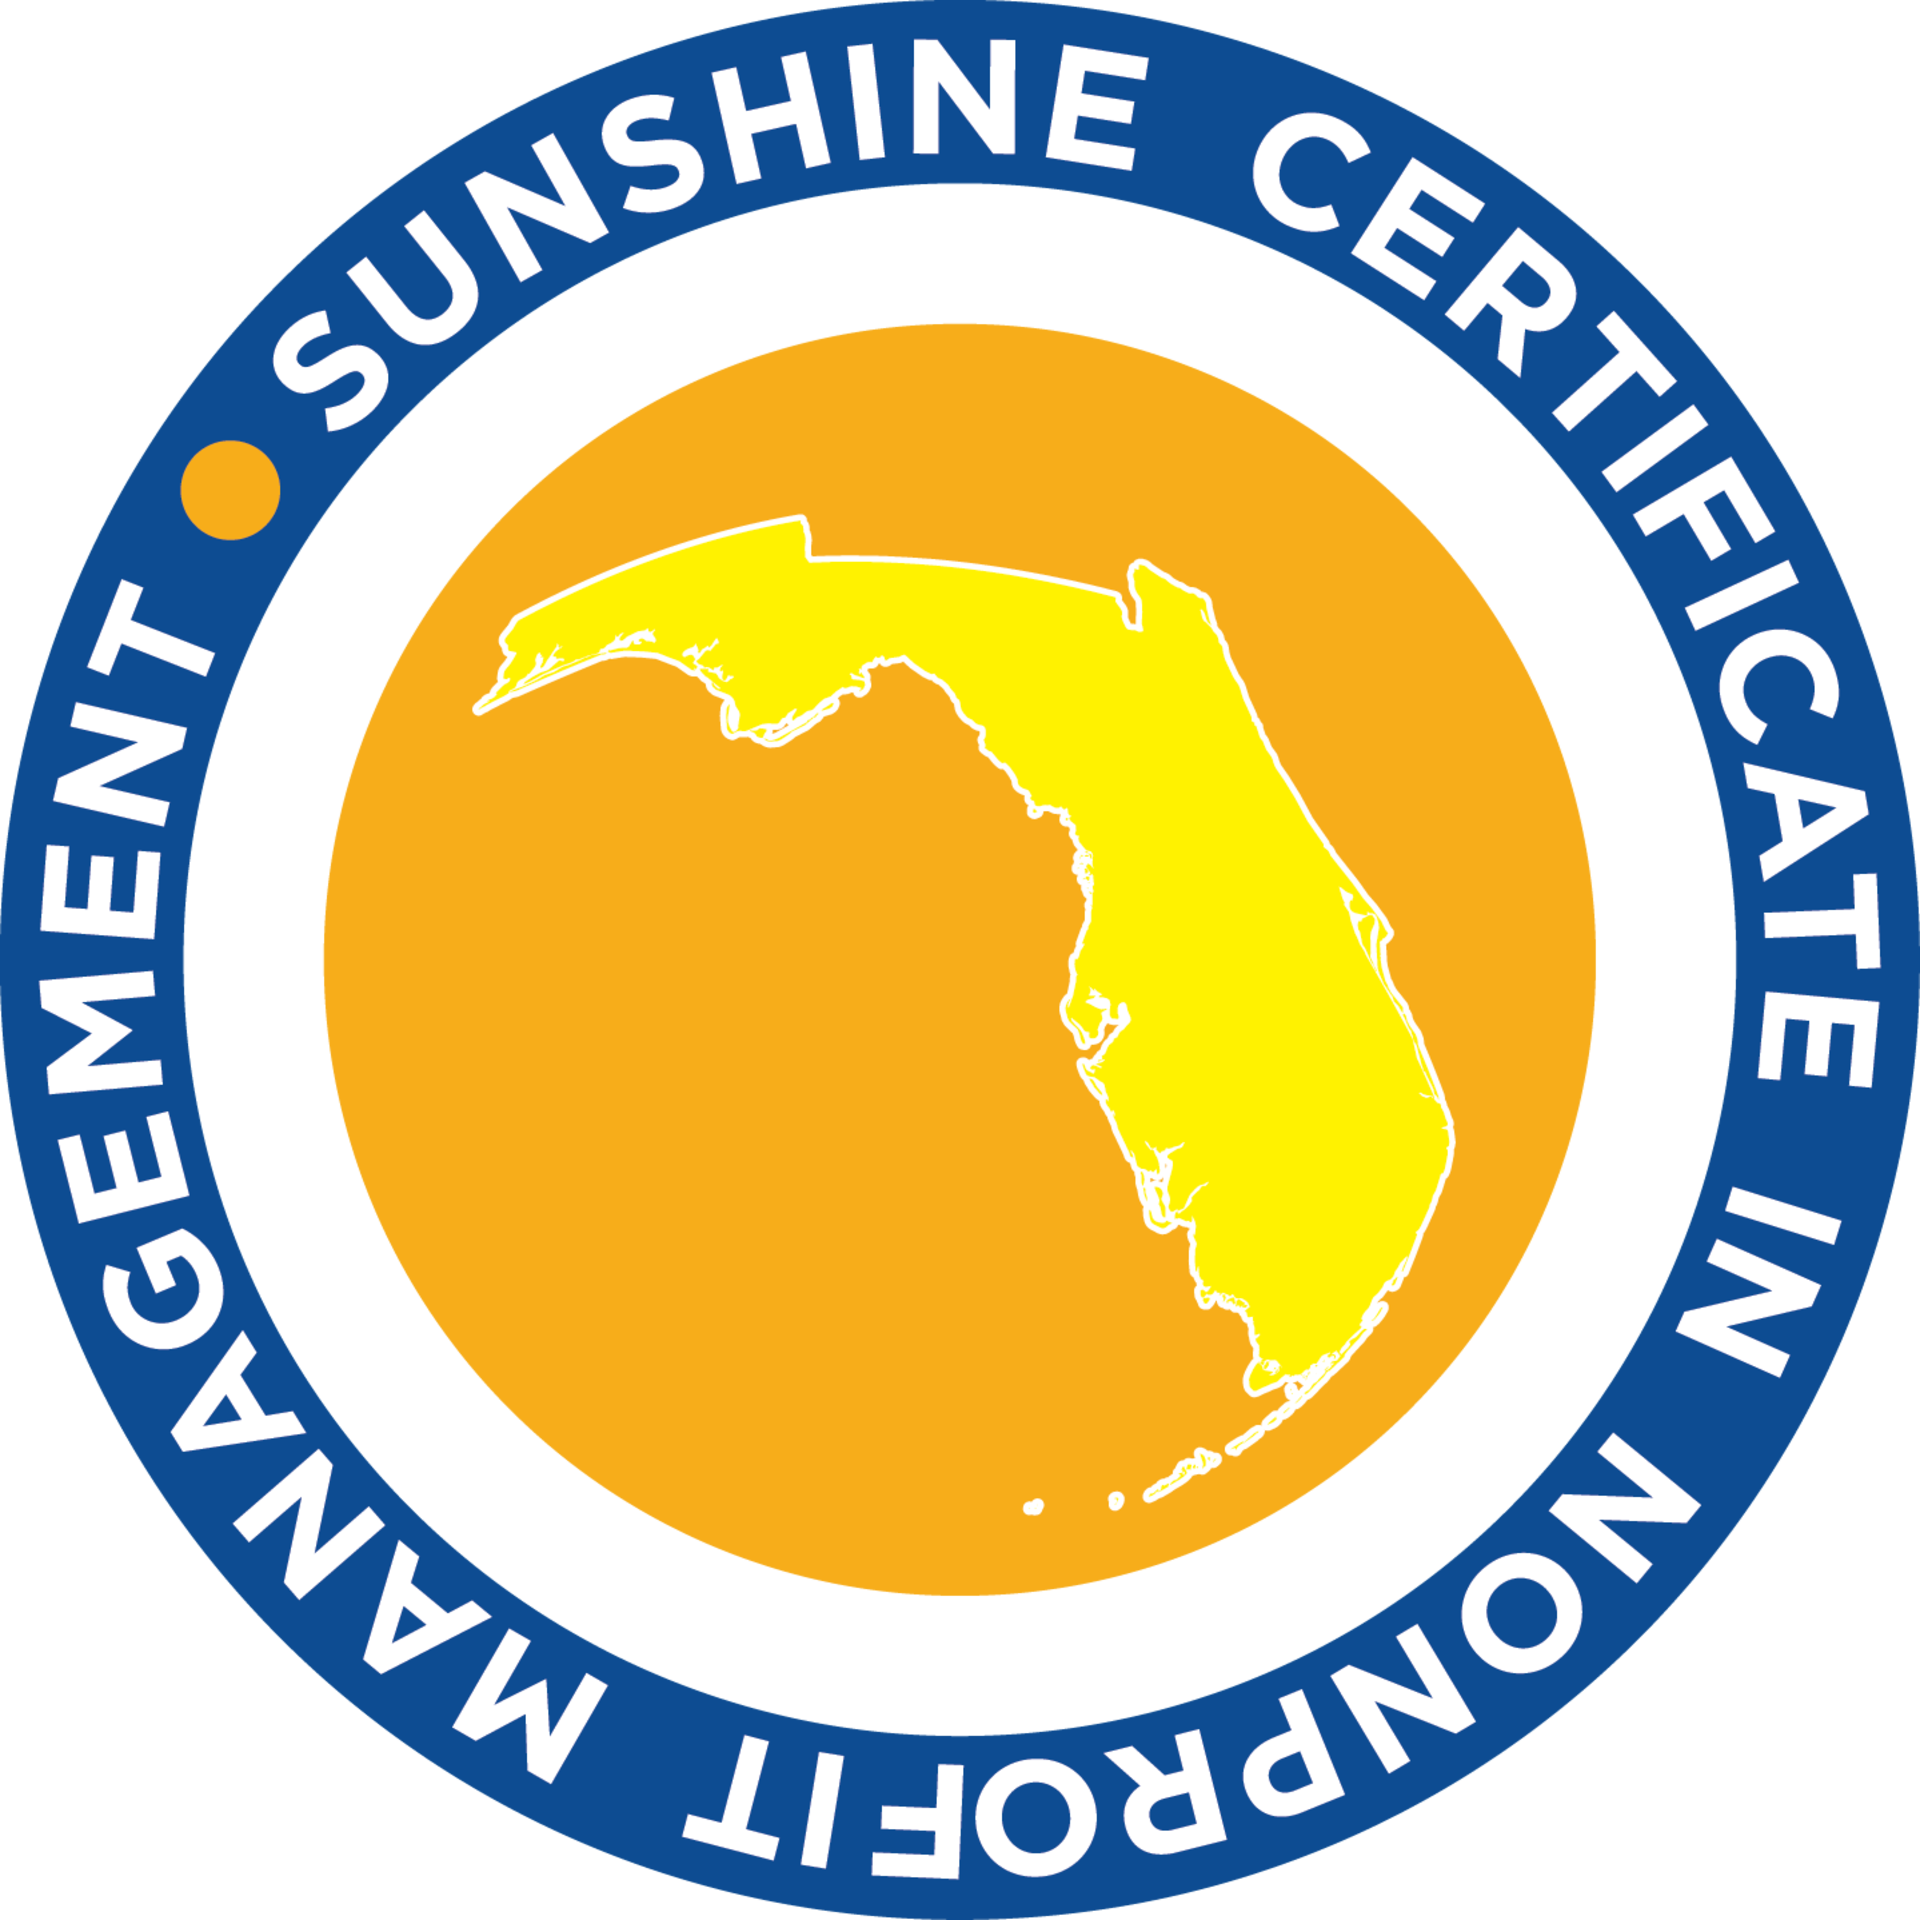  The Florida Association of Nonprofits’ Leadership: Governance Class of the Sunshine Certificate in.....